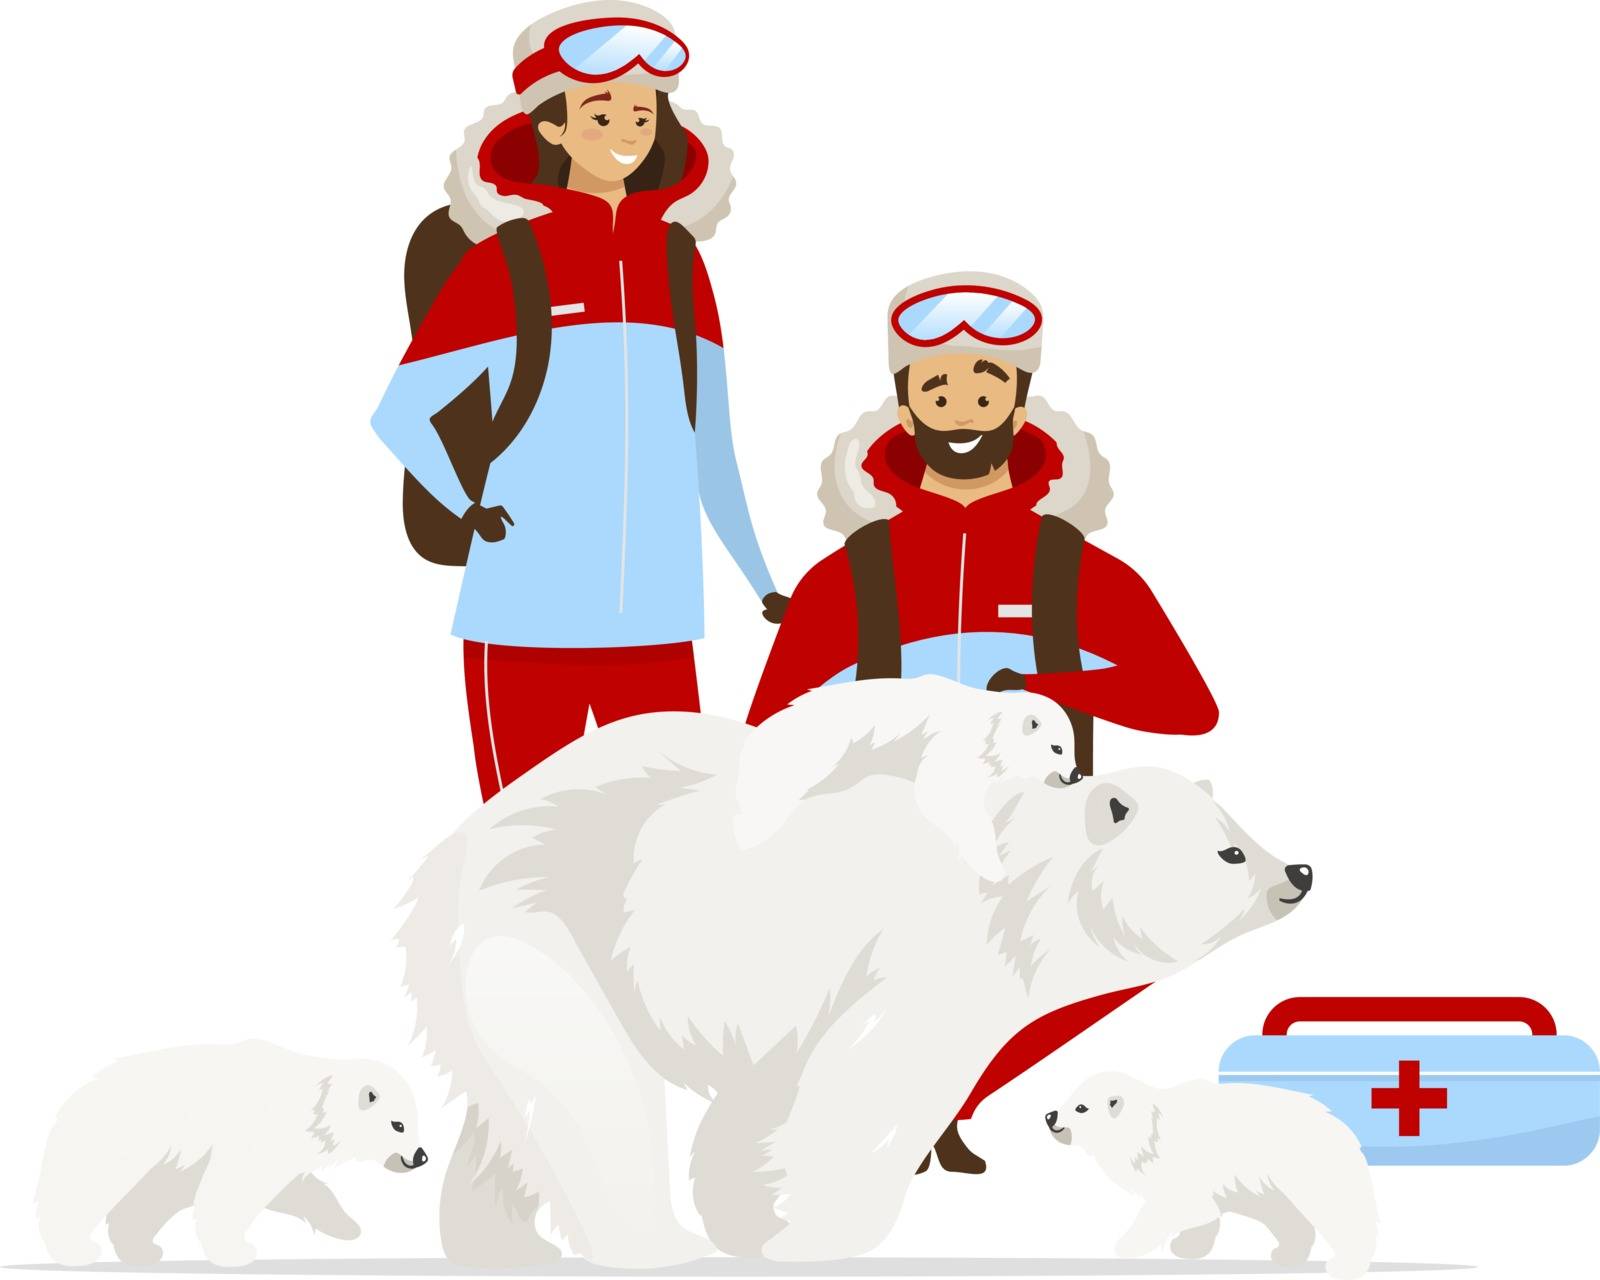 Animal rescue flat color vector illustration. Female and male veterinarians. White polar bear family medical help. Mammal with cubs. People and animal isolated cartoon character on white background